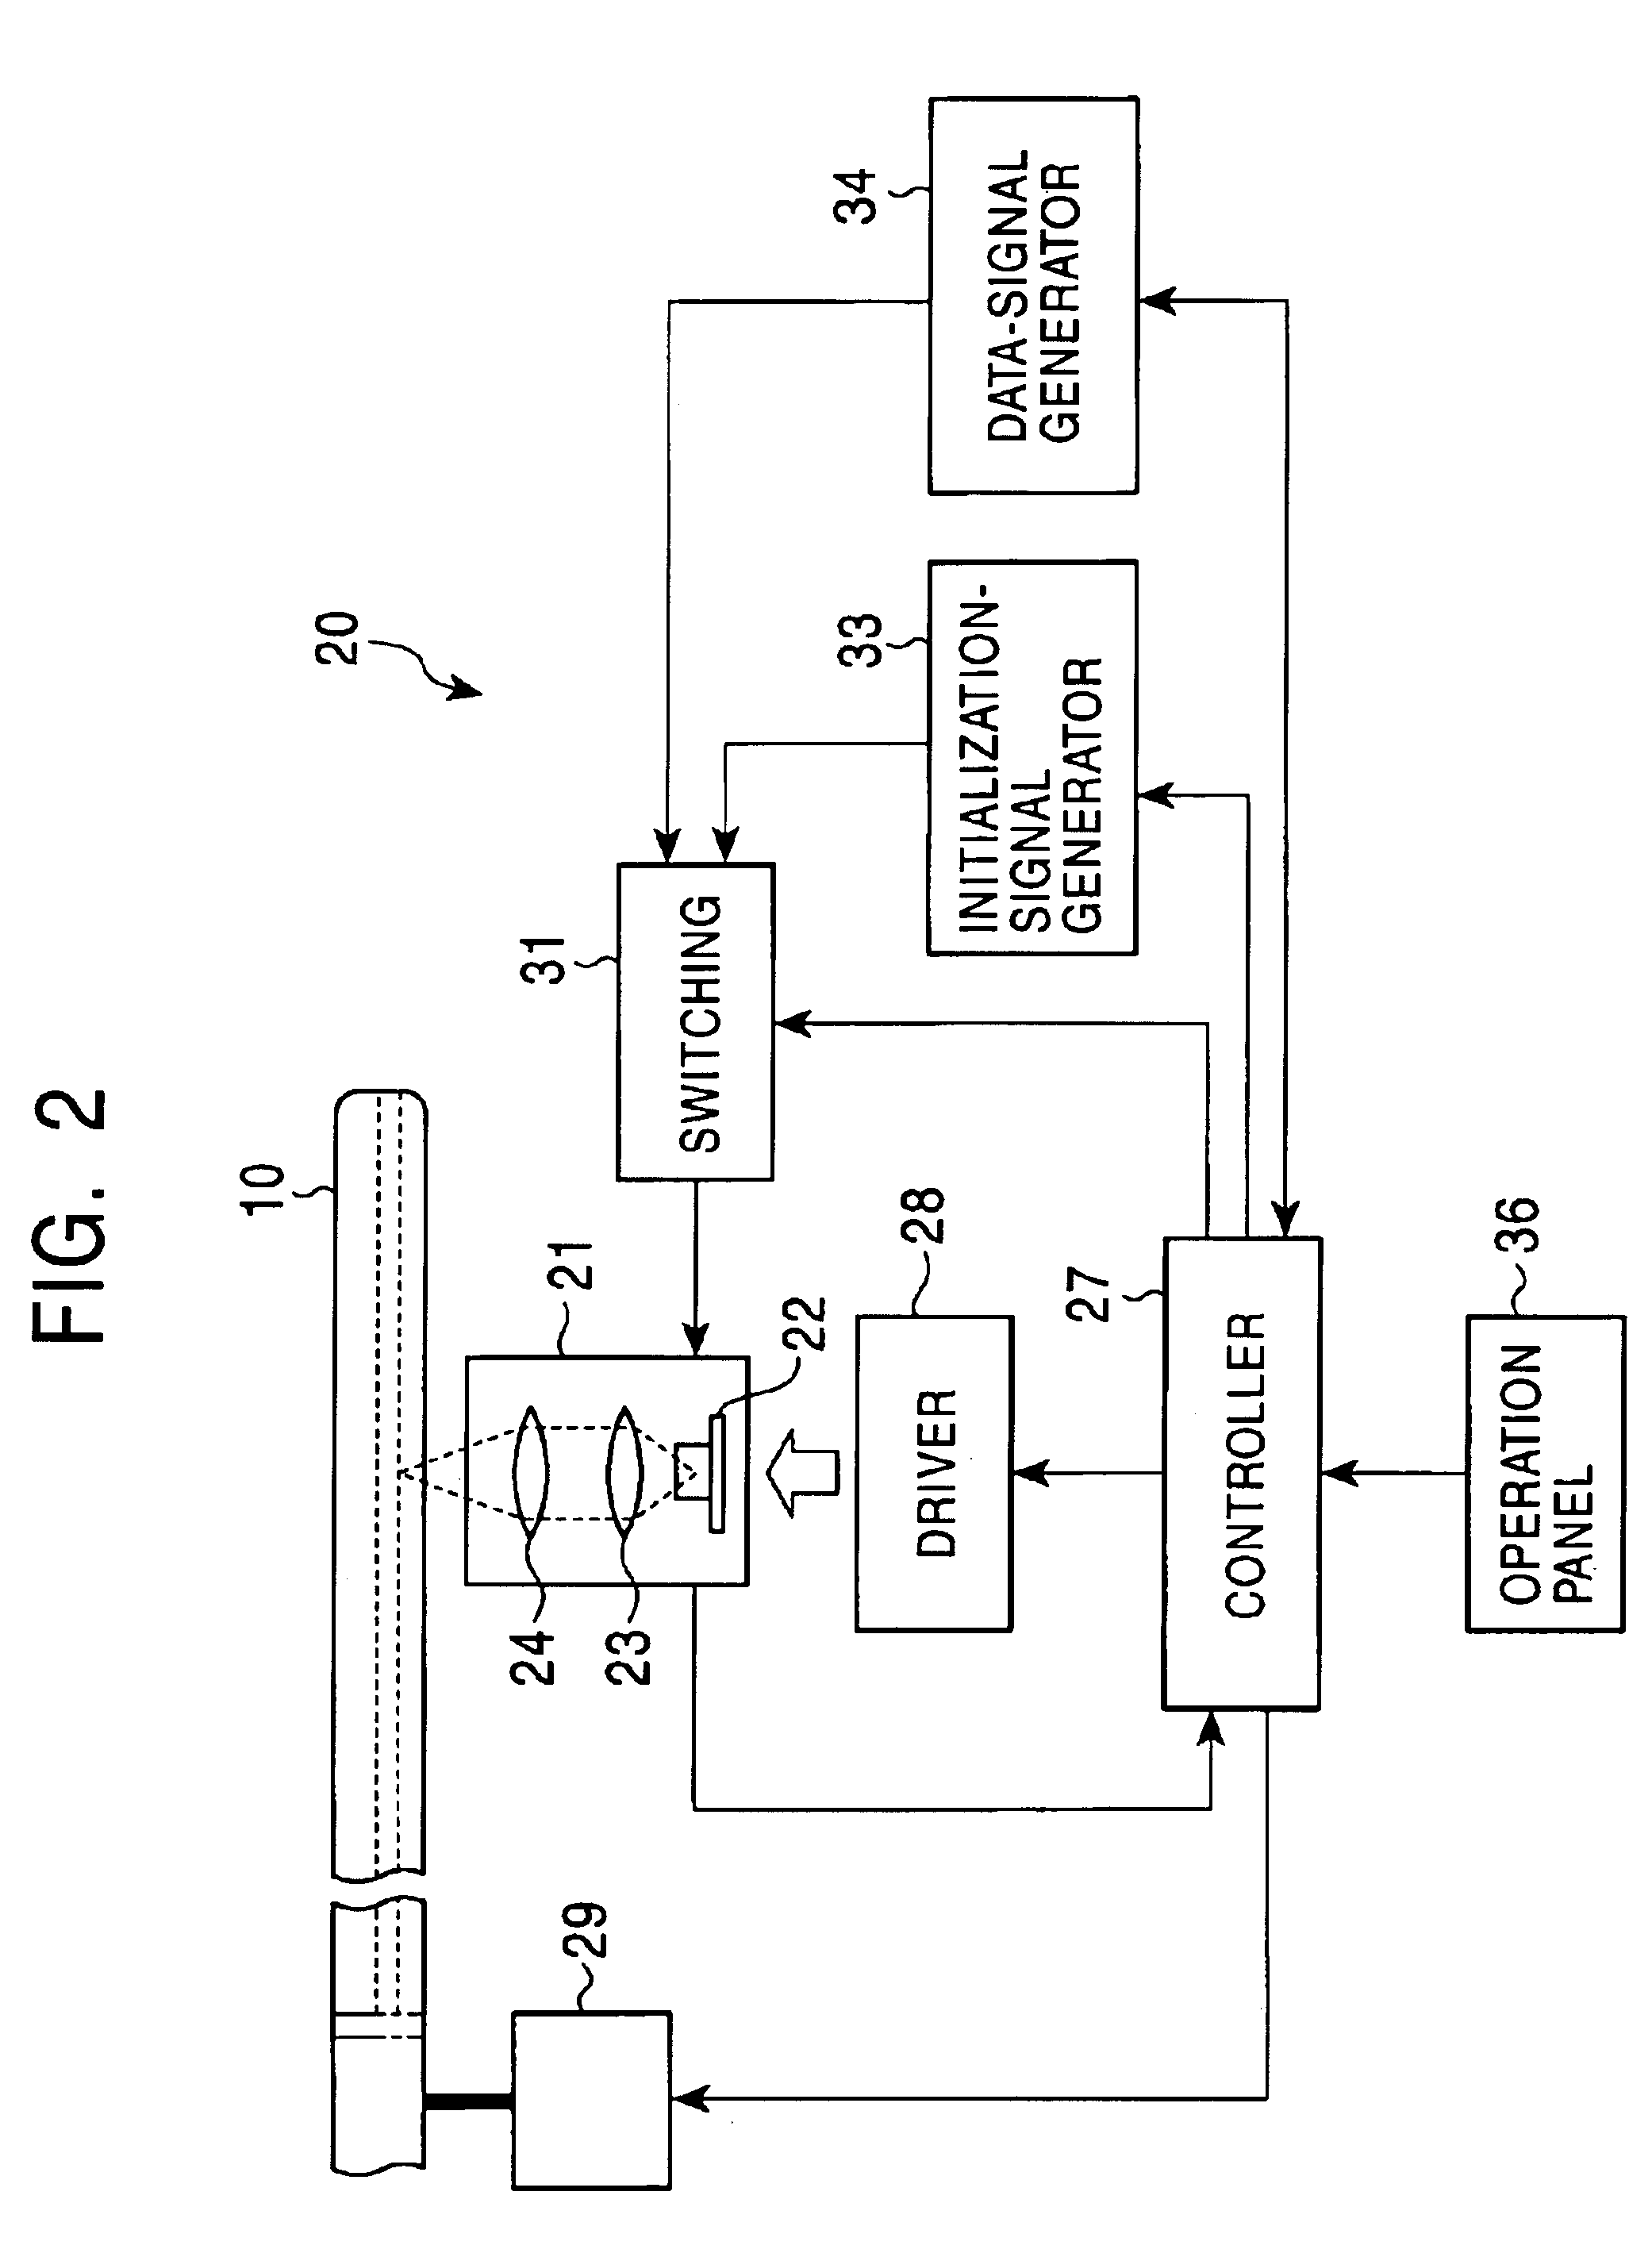 Multilayer optical recording medium and recording method and apparatus for the same